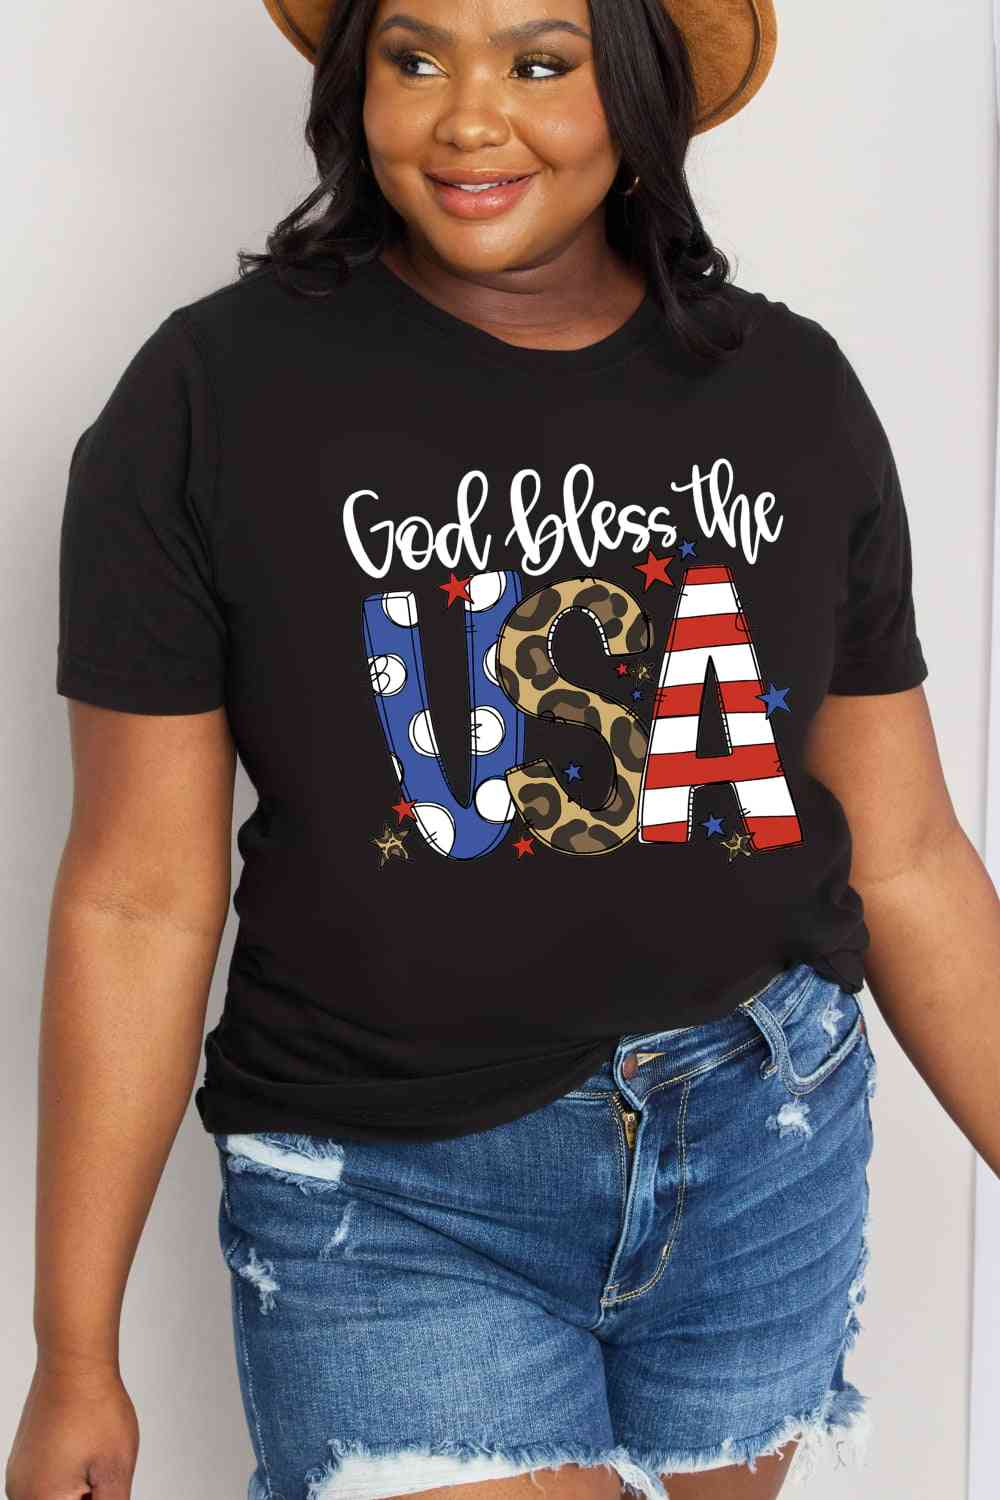 Simply Love Full Size GOD BLESS THE USA Graphic Cotton Tee Black S 